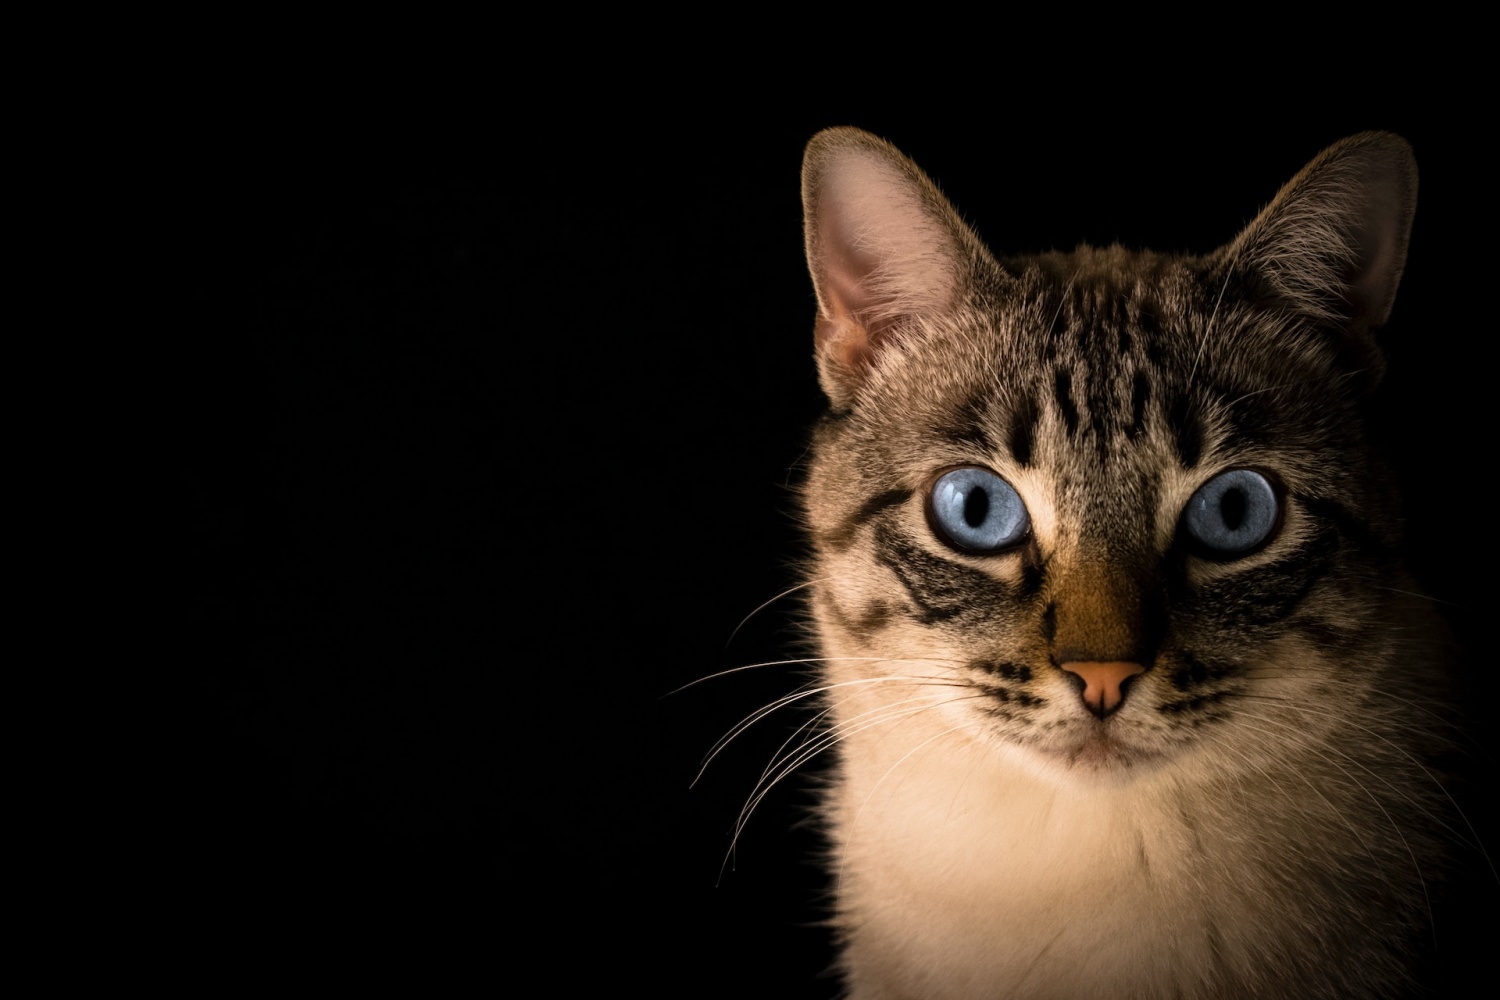 Can Cats Glow in the Dark? New Study Says 125 Mammal Species Have 'Apparent Fluorescence'